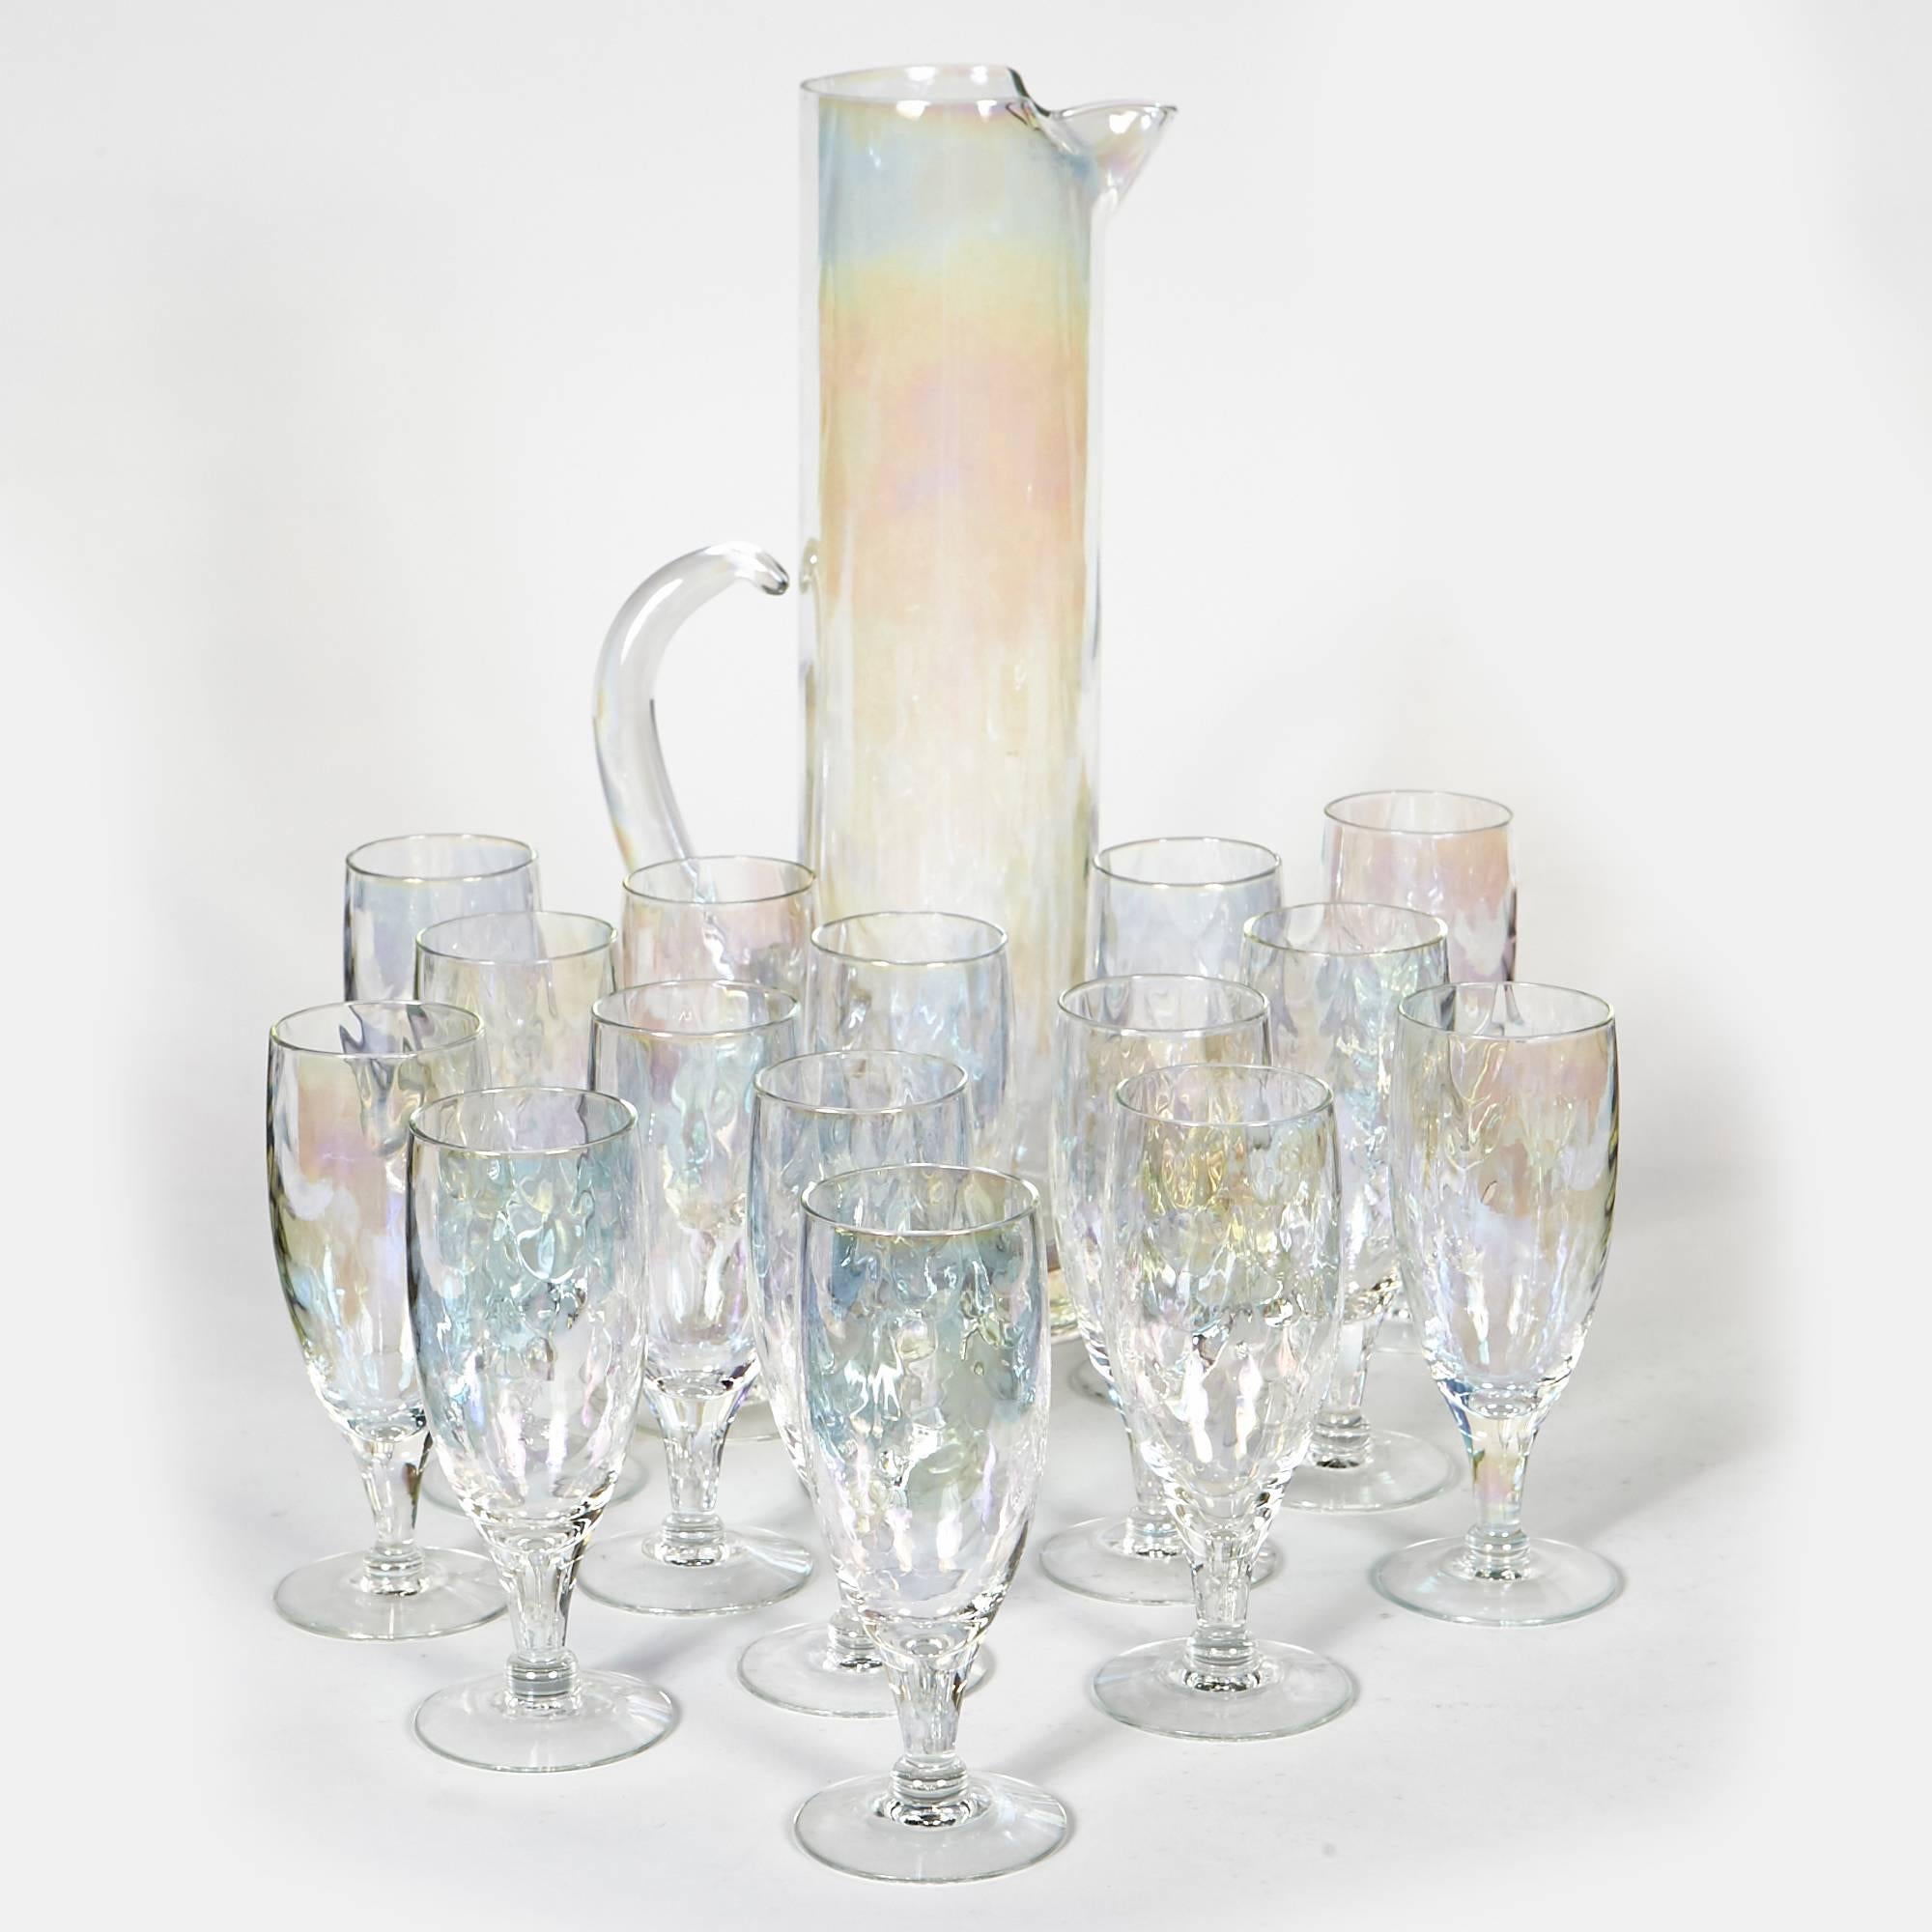 Mid-Century Modern 1950s Iridescent Glass Beverage Entertainment Set of 32 Pieces For Sale